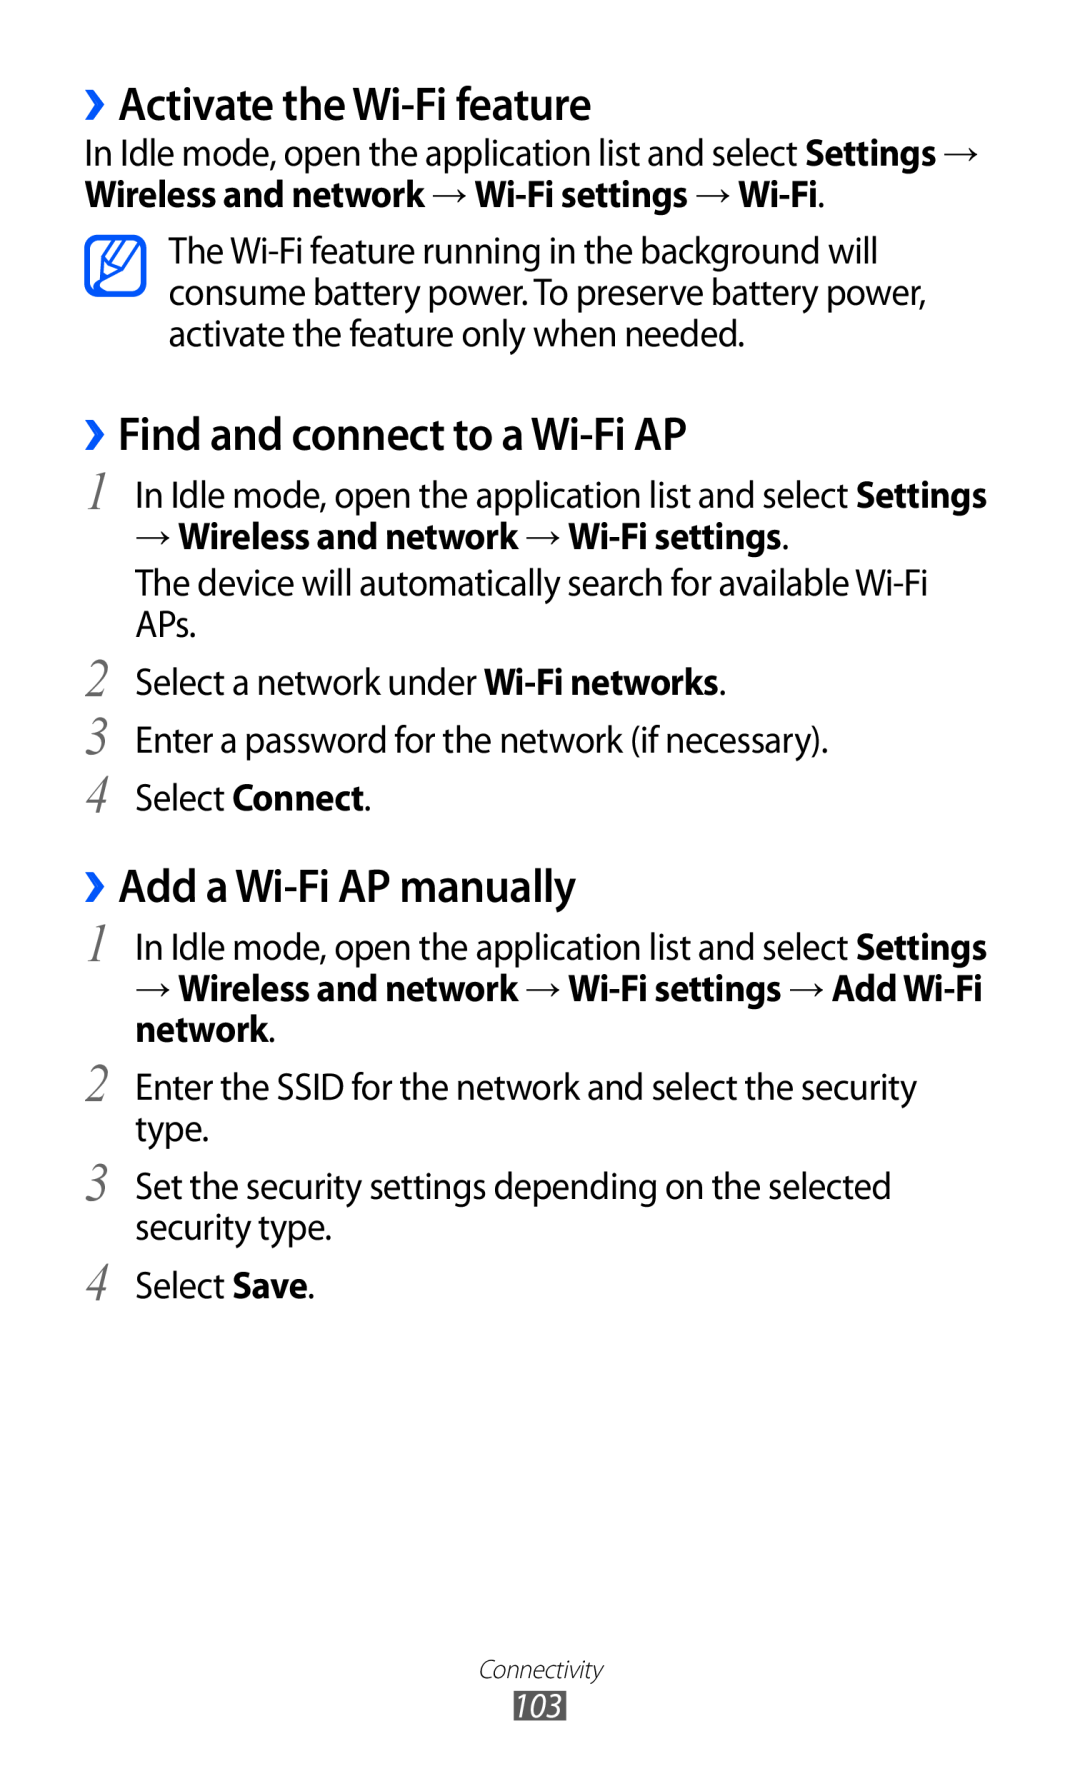 Samsung GT-I9070HKATHR ››Activate the Wi-Fi feature, ››Find and connect to a Wi-Fi AP, ››Add a Wi-Fi AP manually 